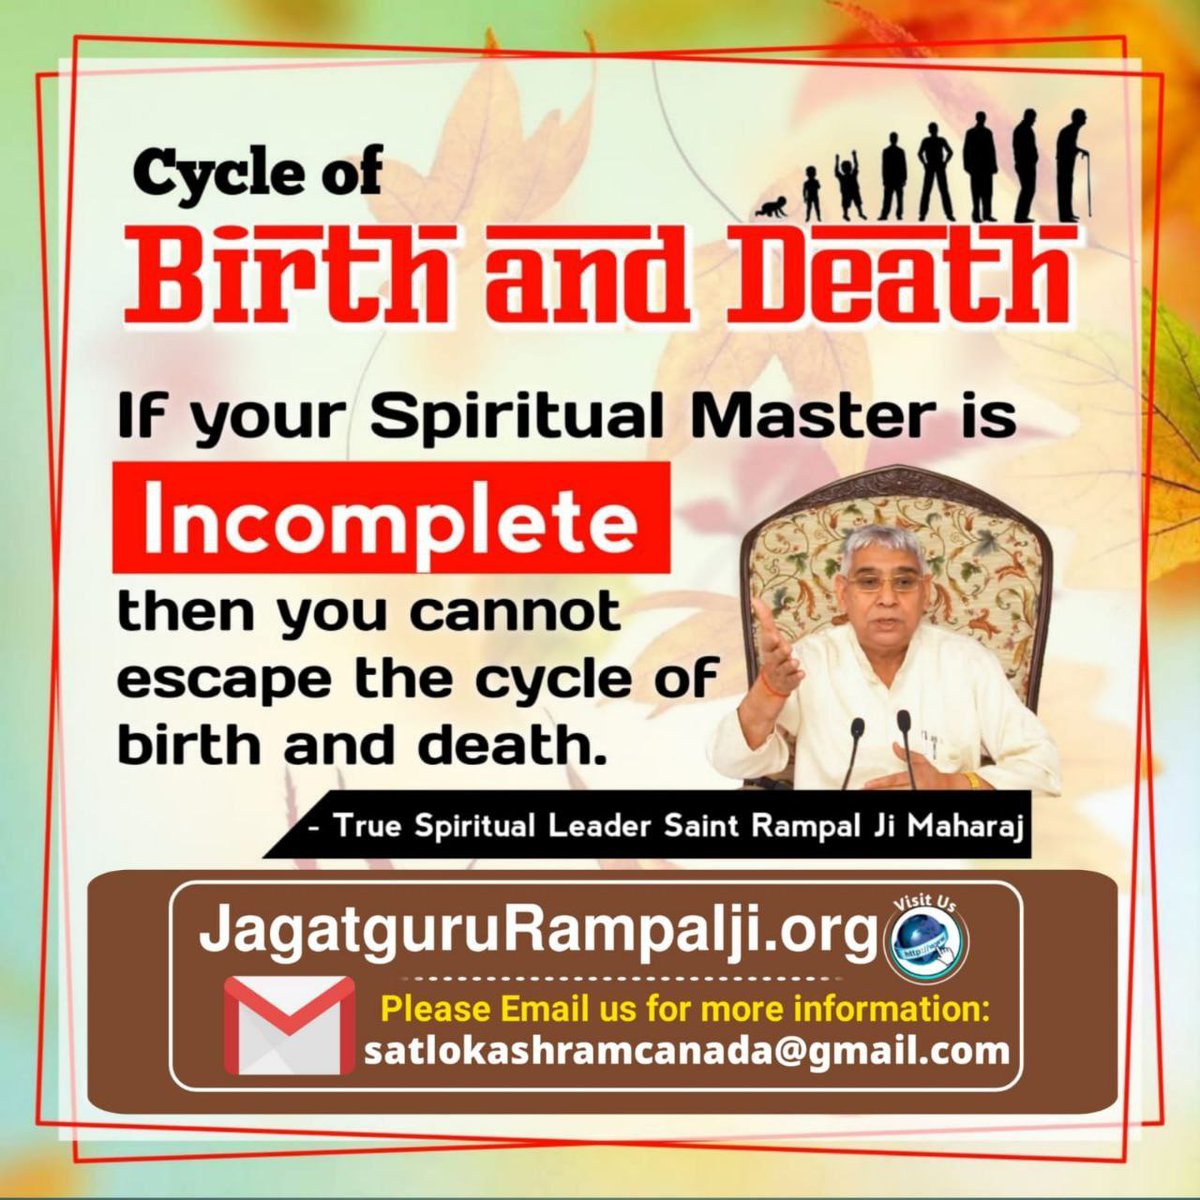 #GodNightWednesday
Cycle of
Birth and Death
If your spiritual Master is
Incomplete
then you cannot escape the cycle of birth and death.
~ True Spiritual Leader Saint Rampal Ji Maharaj
Must Visit our Satlok Ashram YouTube Channel for More Information
#wednesdaythought